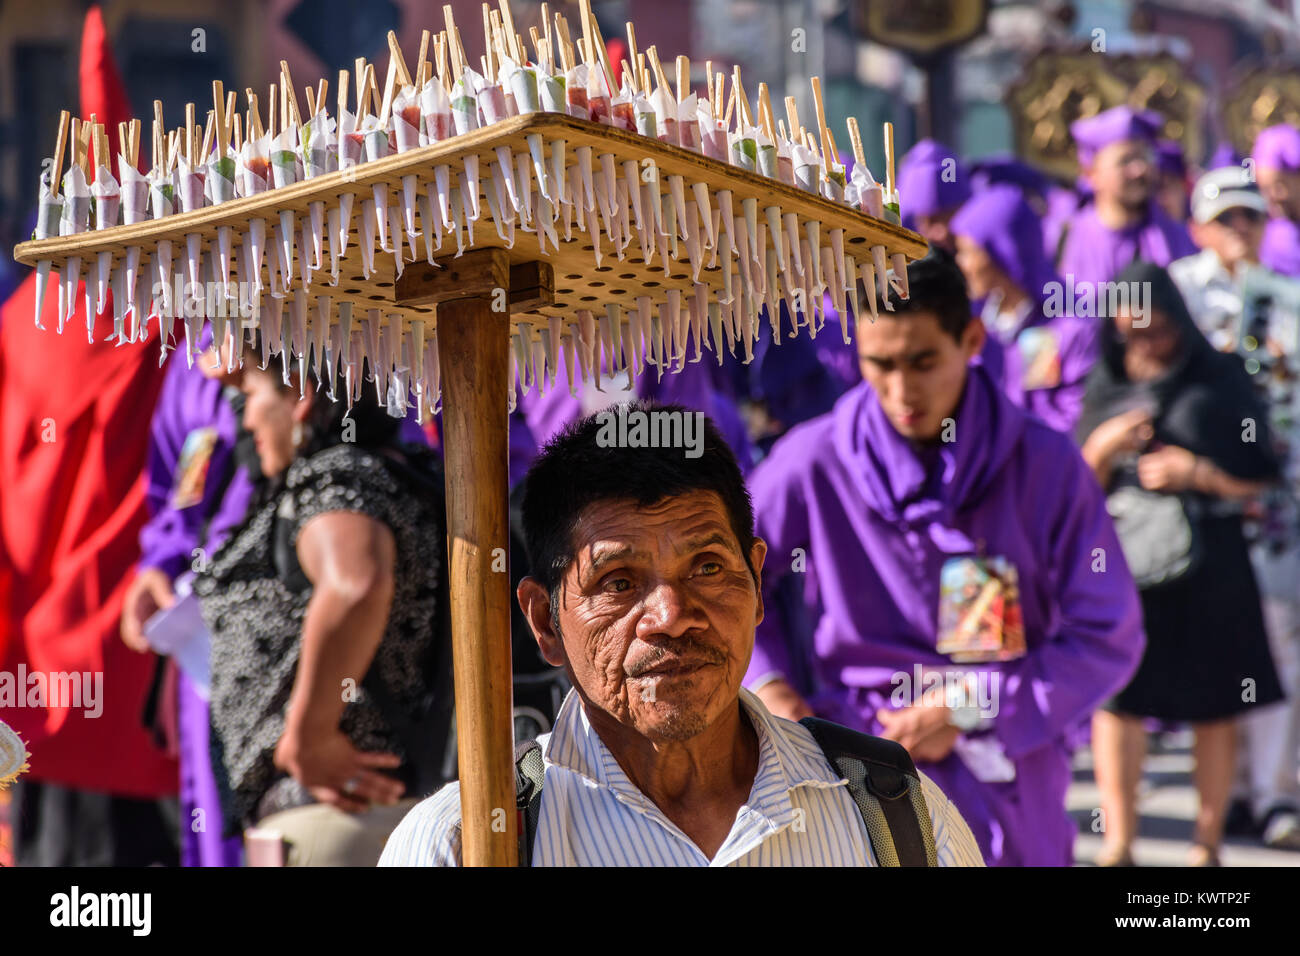 Antigua, Guatemala -  March 19, 2017: Candy seller follows Lent procession in colonial town with most famous Holy Week celebrations in Latin America. Stock Photo